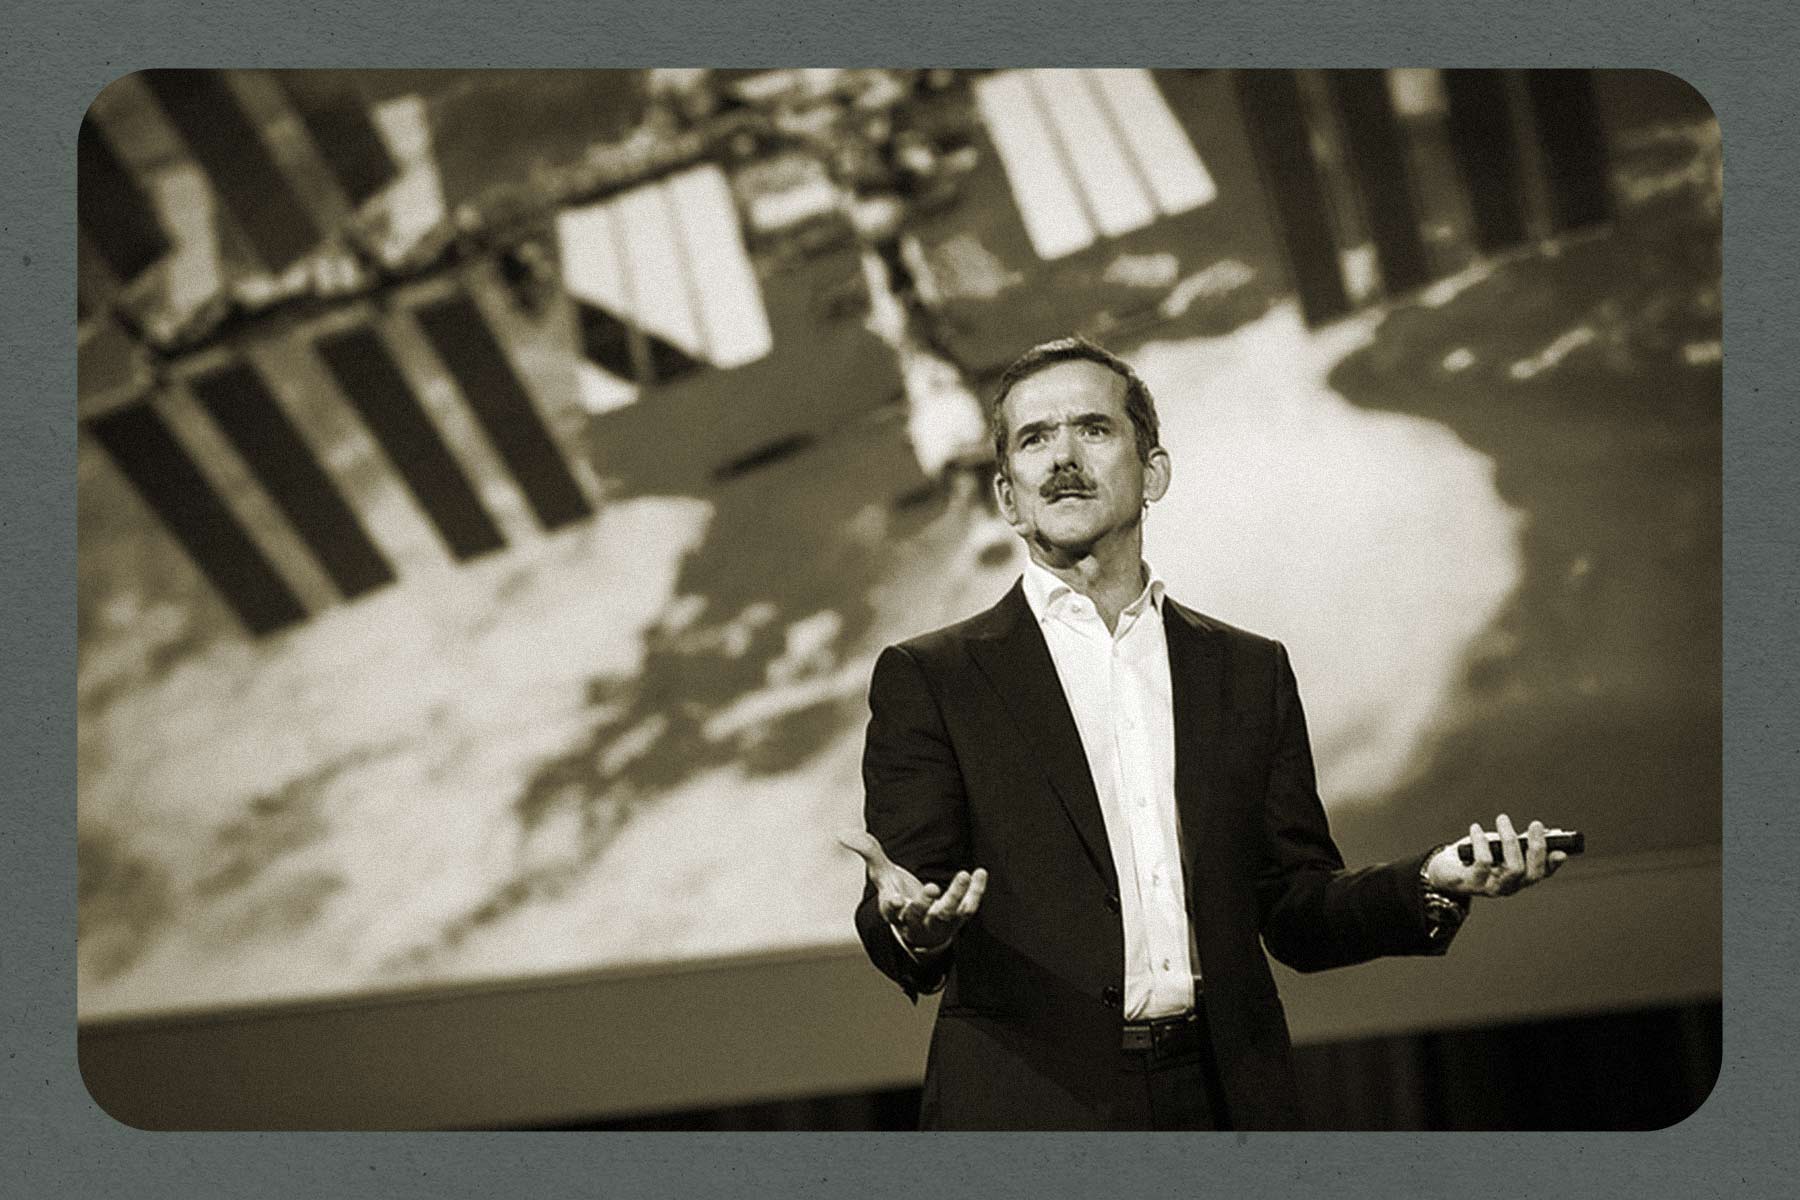 A black-and-white photo of Chris Hadfield speaking at a TED Conference in 2014. There is a blue border around the image.